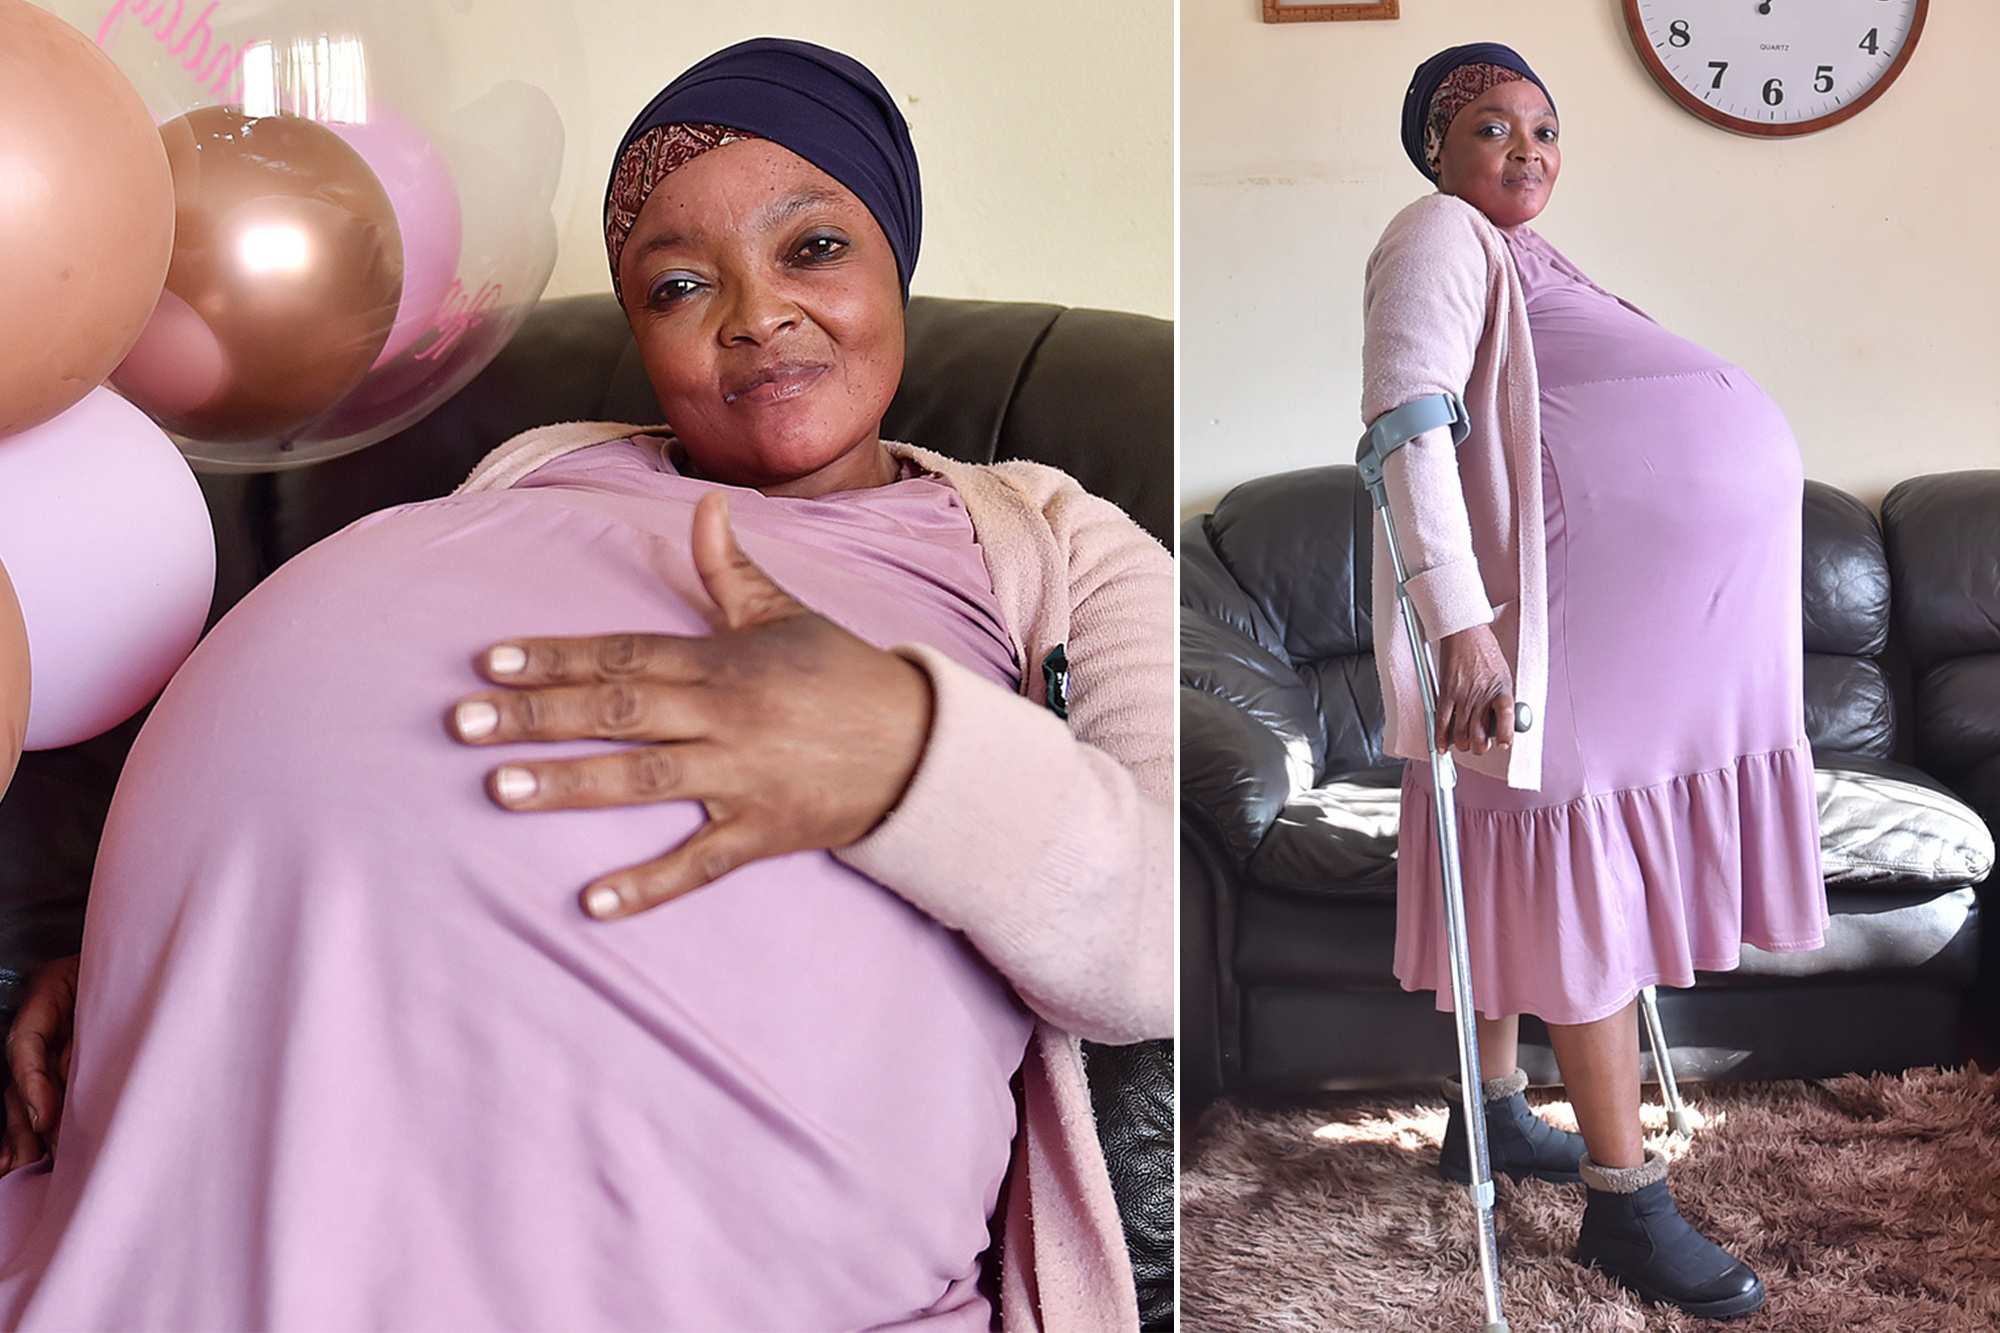 Gosiame Thamara: How woman gave birth to 10 babies in South Africa